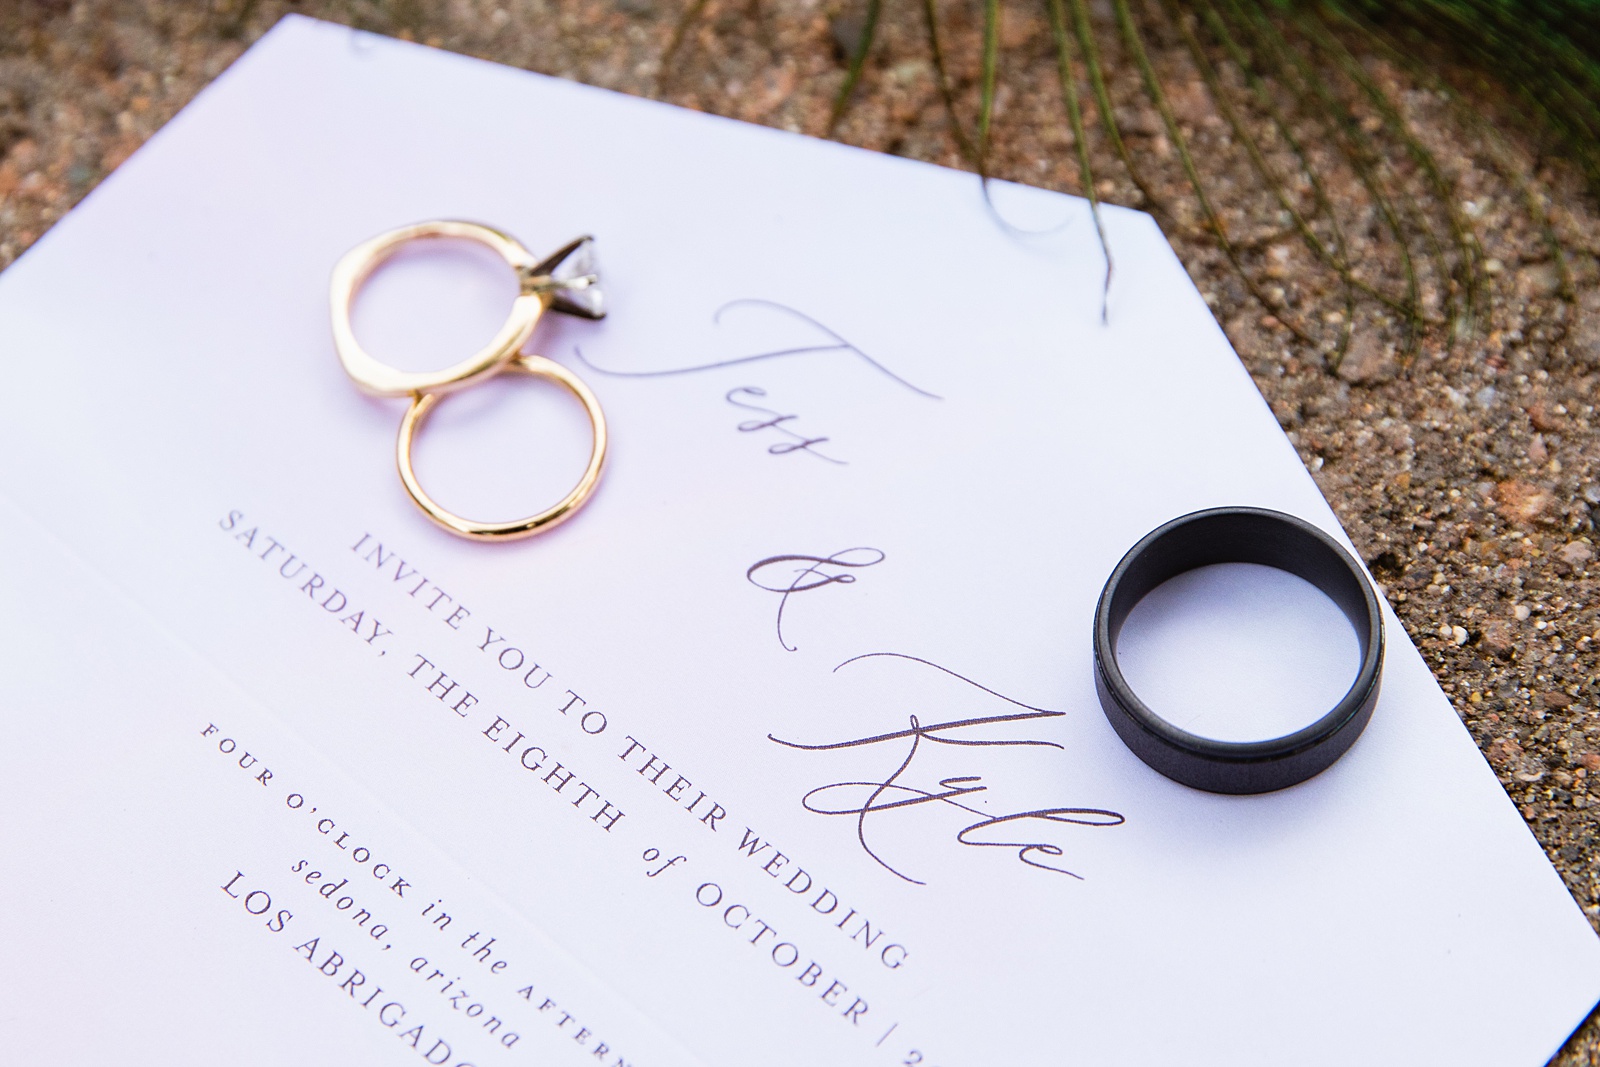 Bride and Groom's wedding day details of invitation and wedding bands by PMA Photography.